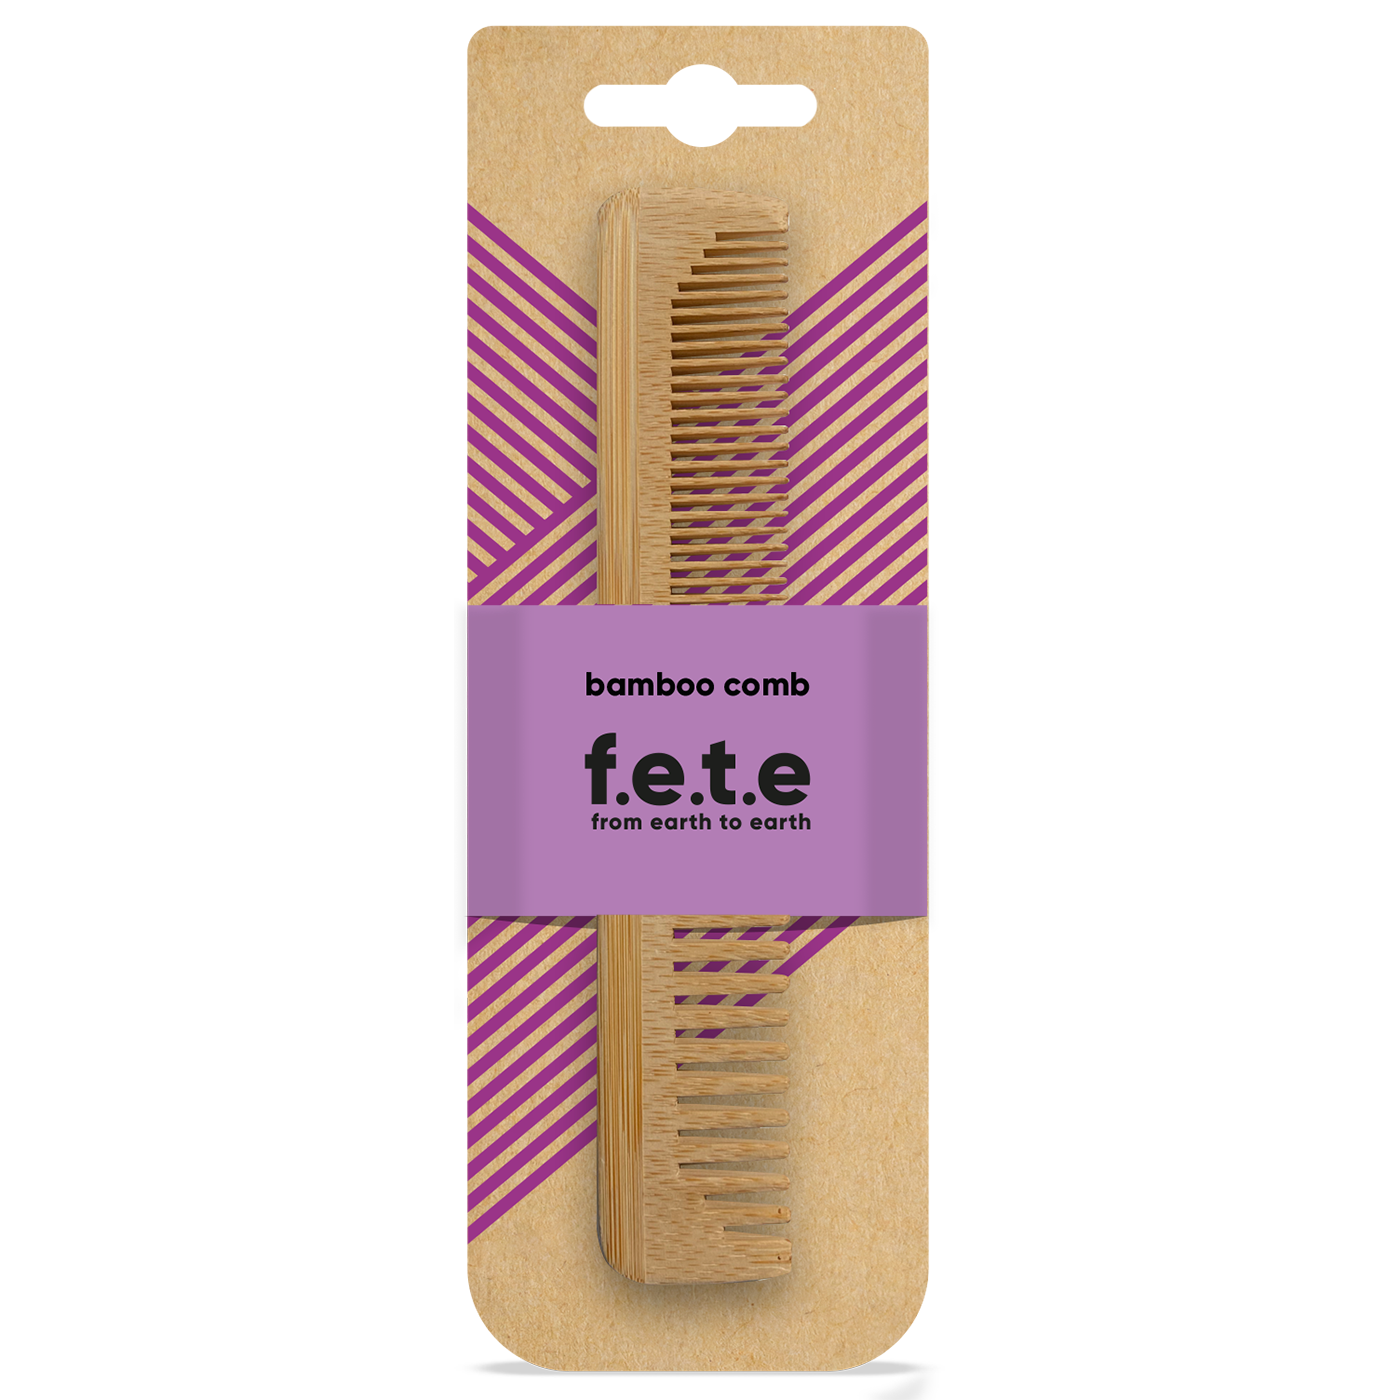 Peigne en bambou - Beautiful Bamboo Toothbrushes from f.e.t.e